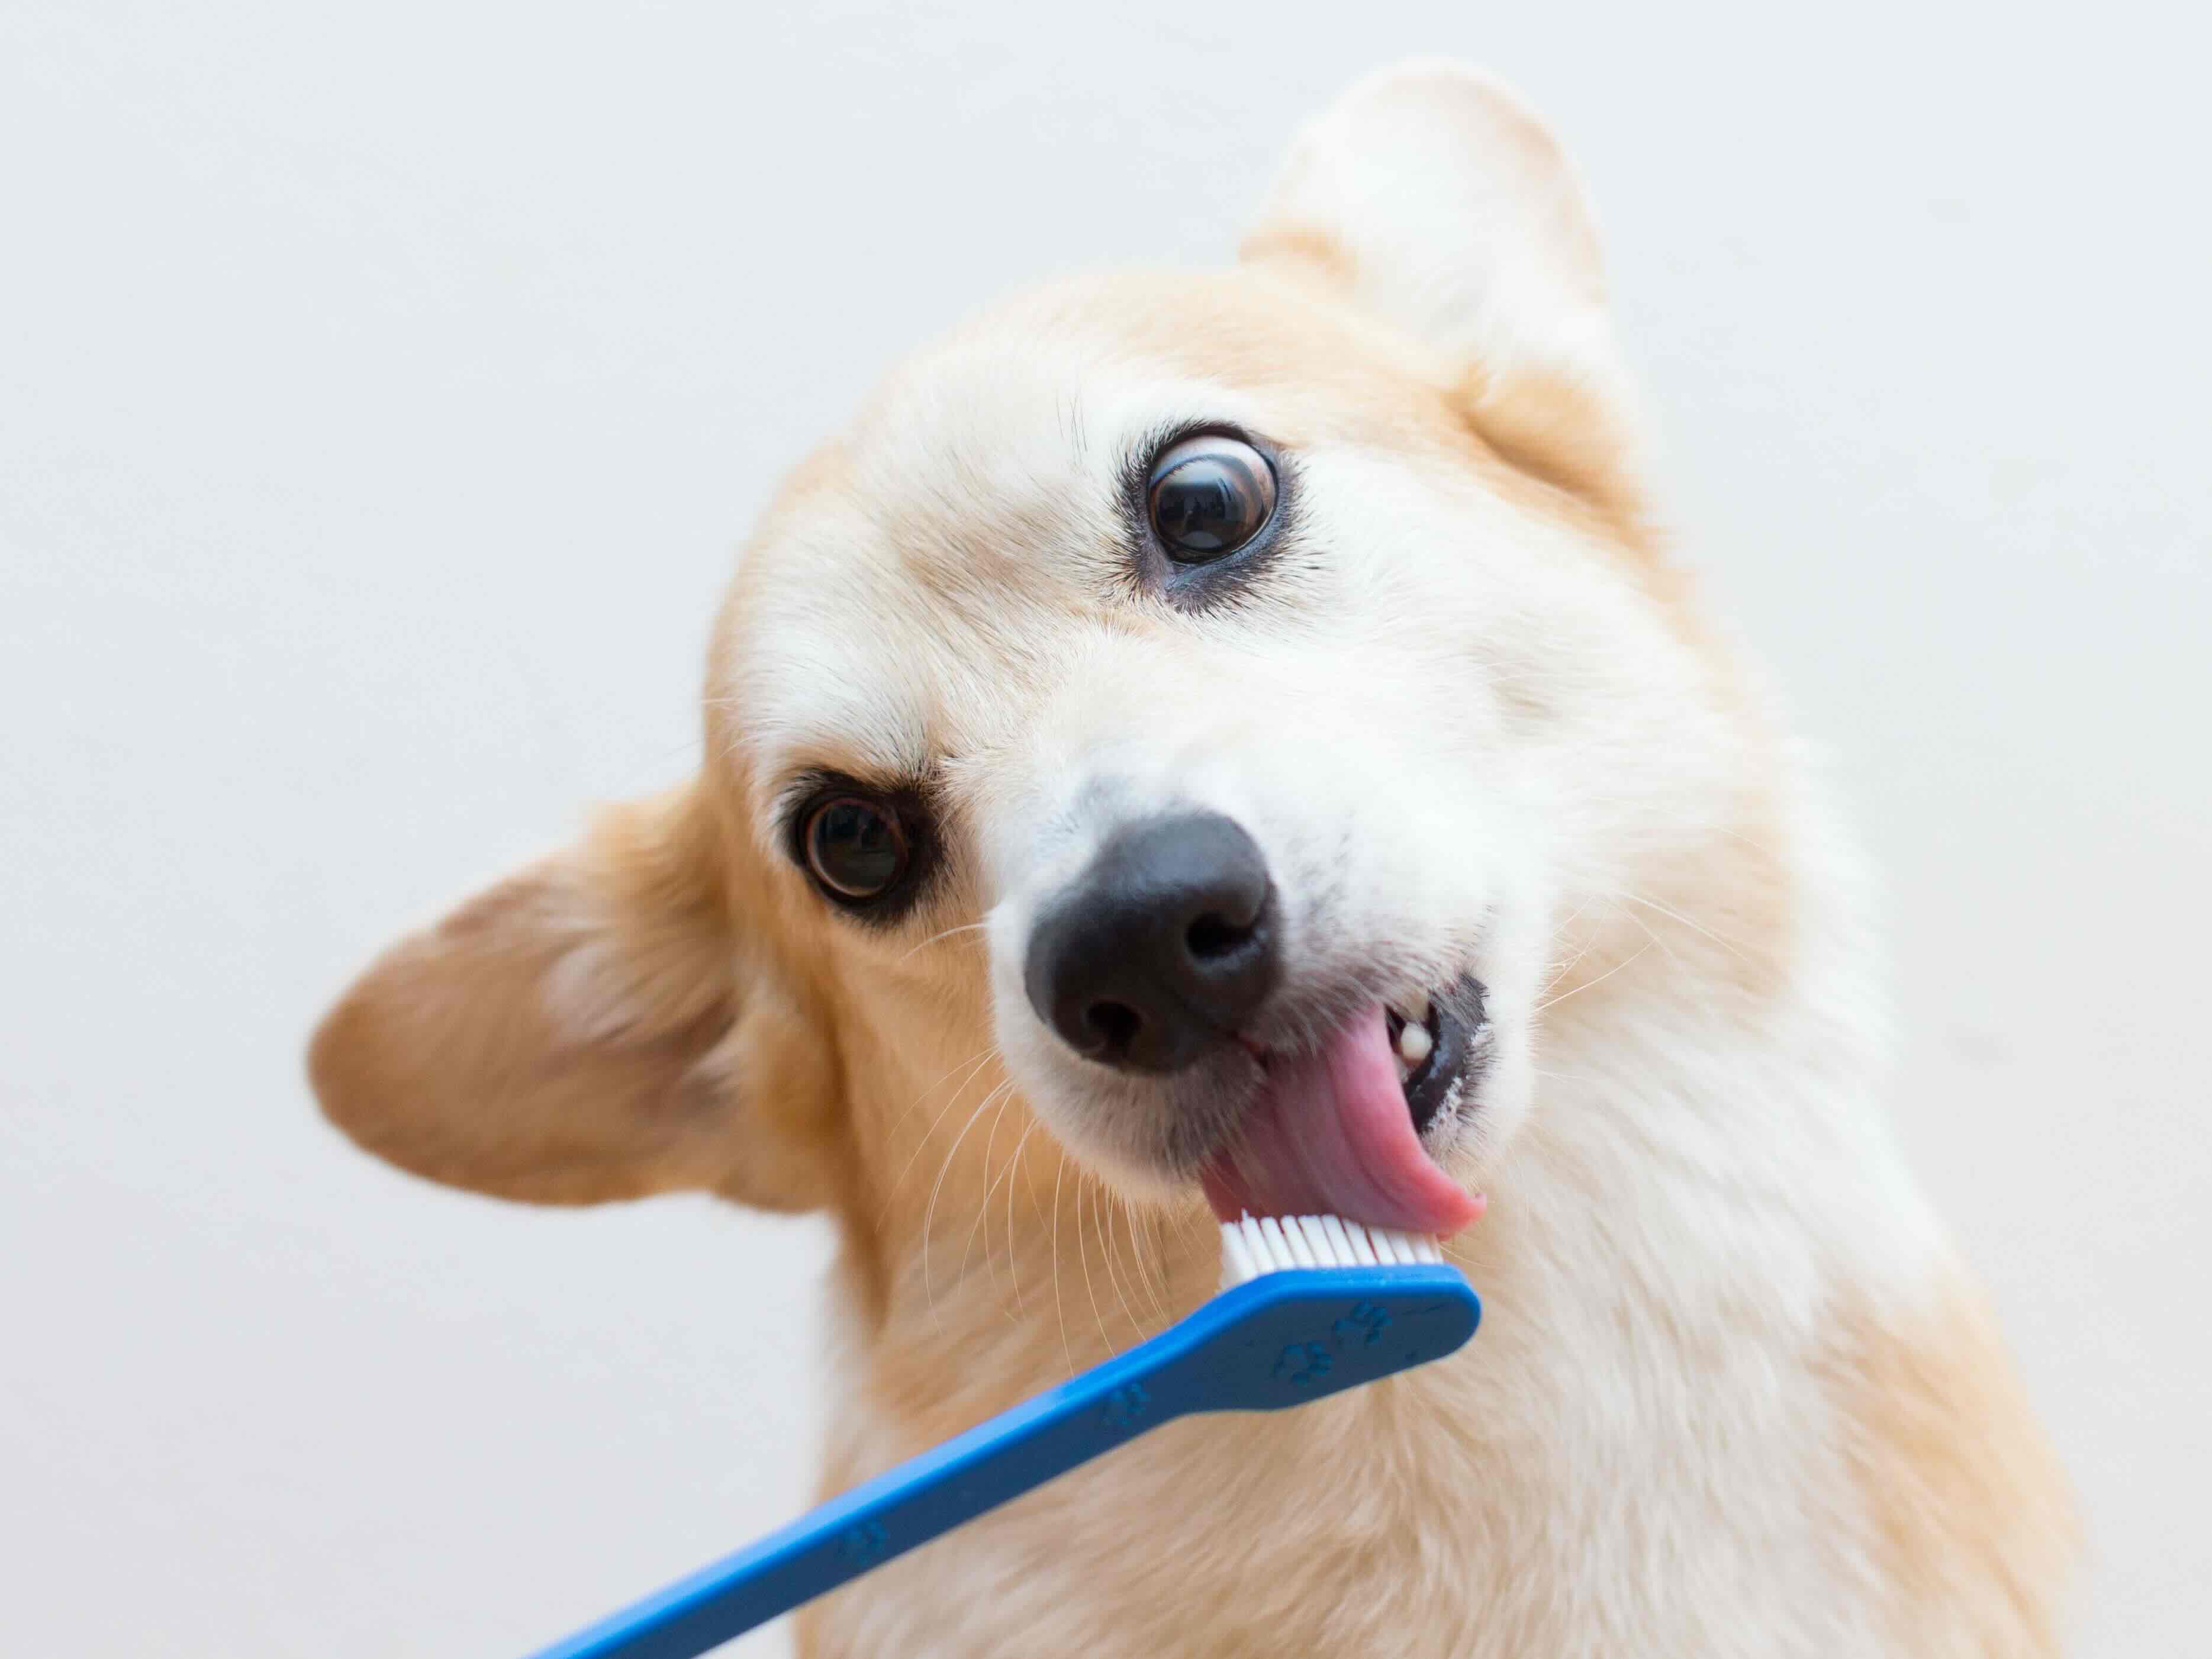 How Do You Use A Dog Toothbrush